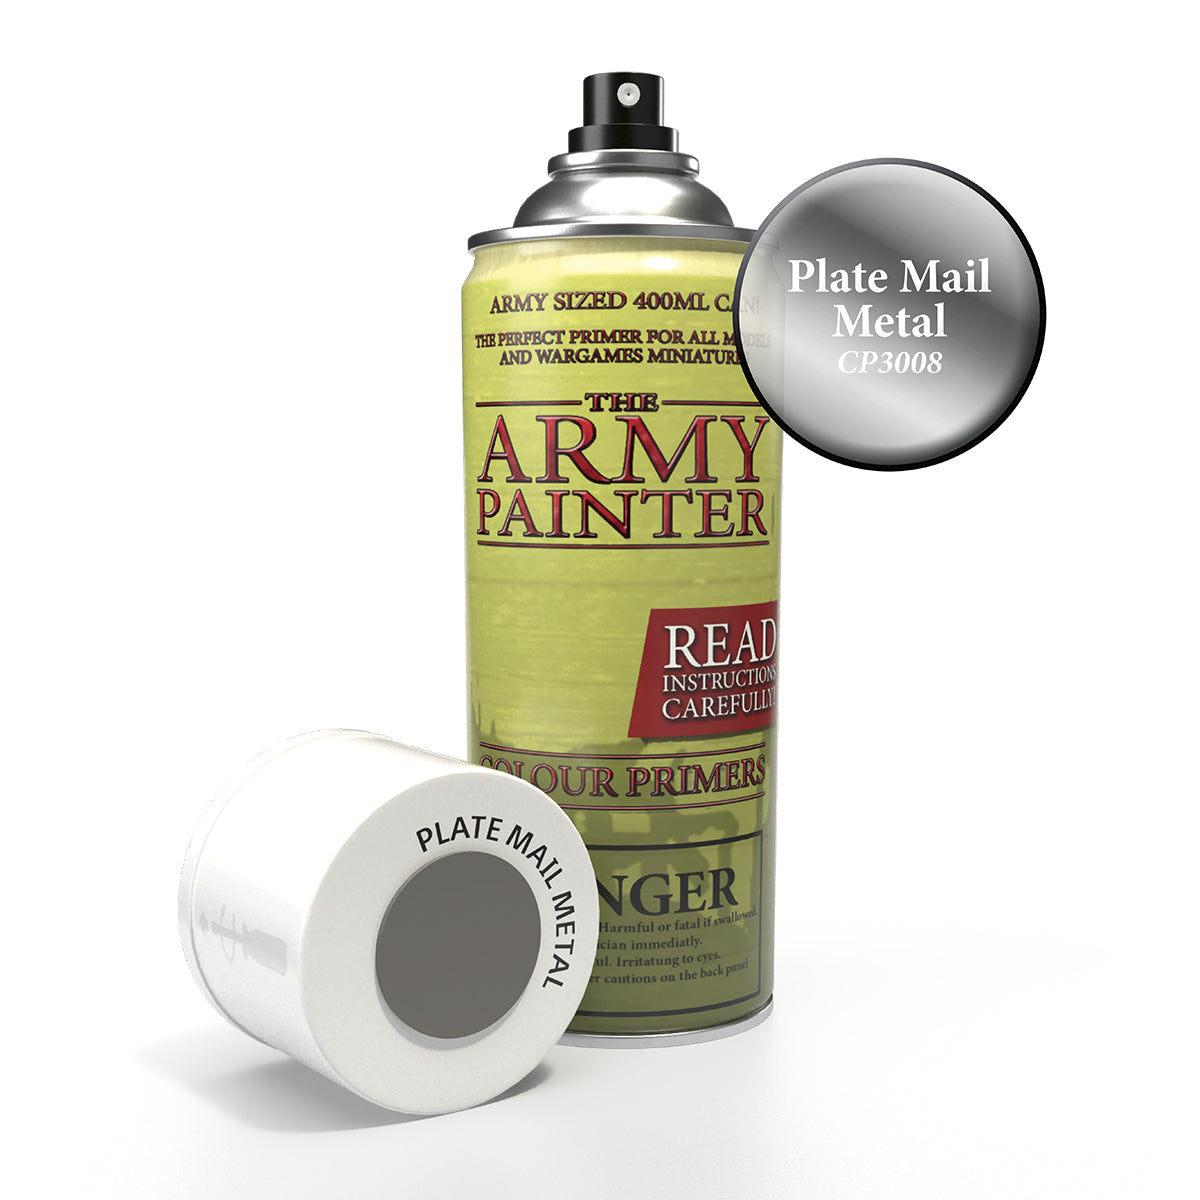 Army Painter Colour Primer - Plate Mail Metal